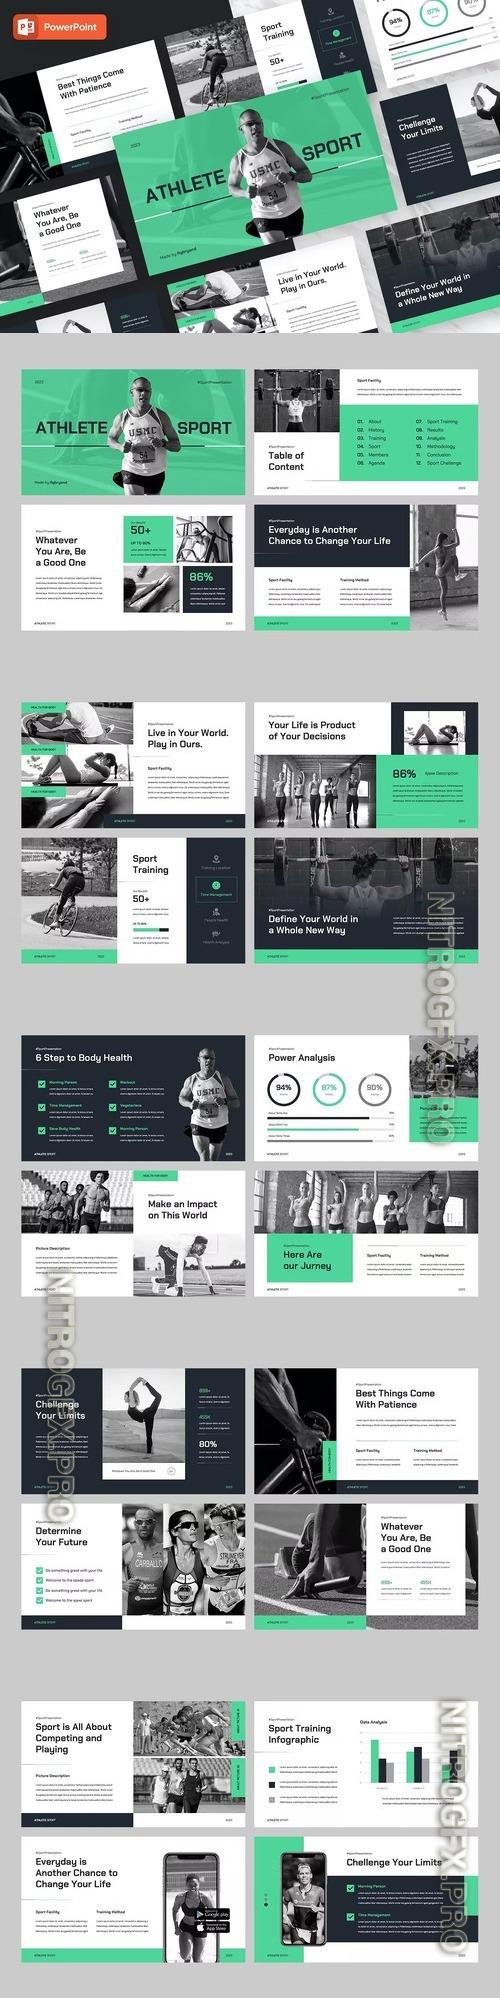 ATHLETE - Sport & Fitness Powerpoint Template